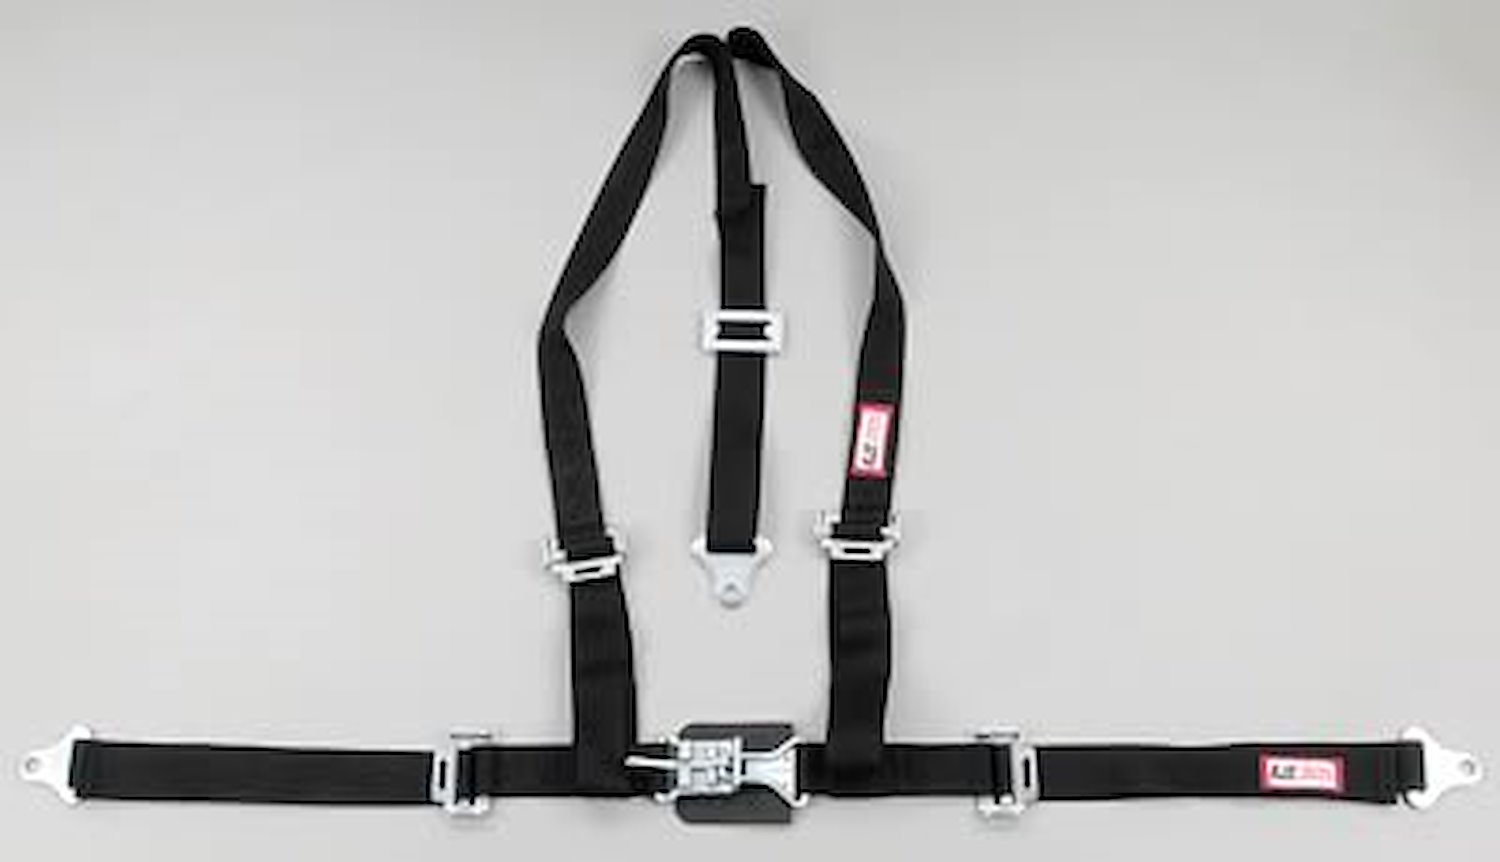 NON-SFI L&L HARNESS 2 PULL DOWN Lap Belt SEWN IN 2 S.H. V ROLL BAR Mount w/STERNUM STRAP ALL SNAP ENDS GRAY